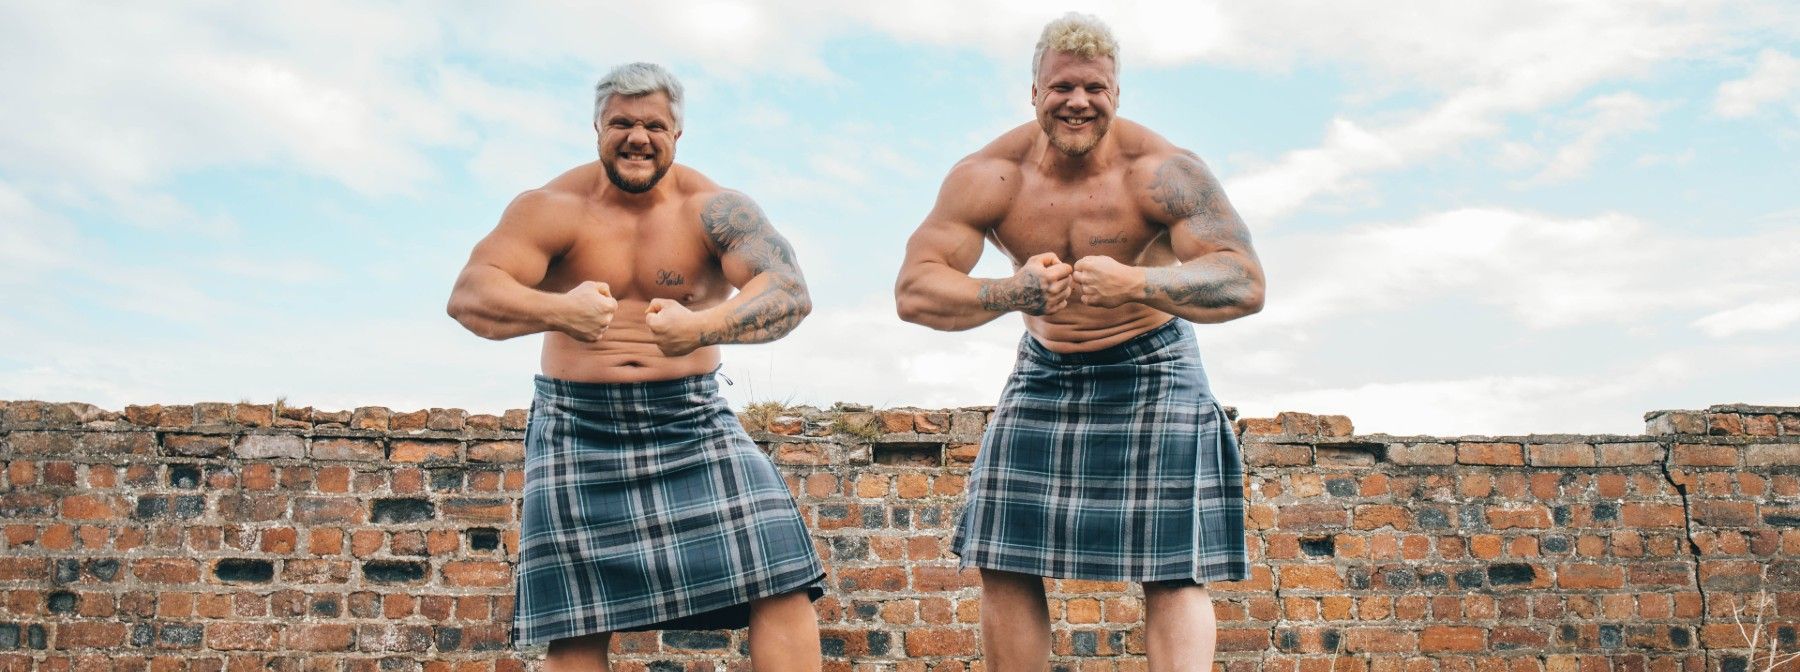 Build Muscle With These 3 Moves From The World’s Strongest Brothers